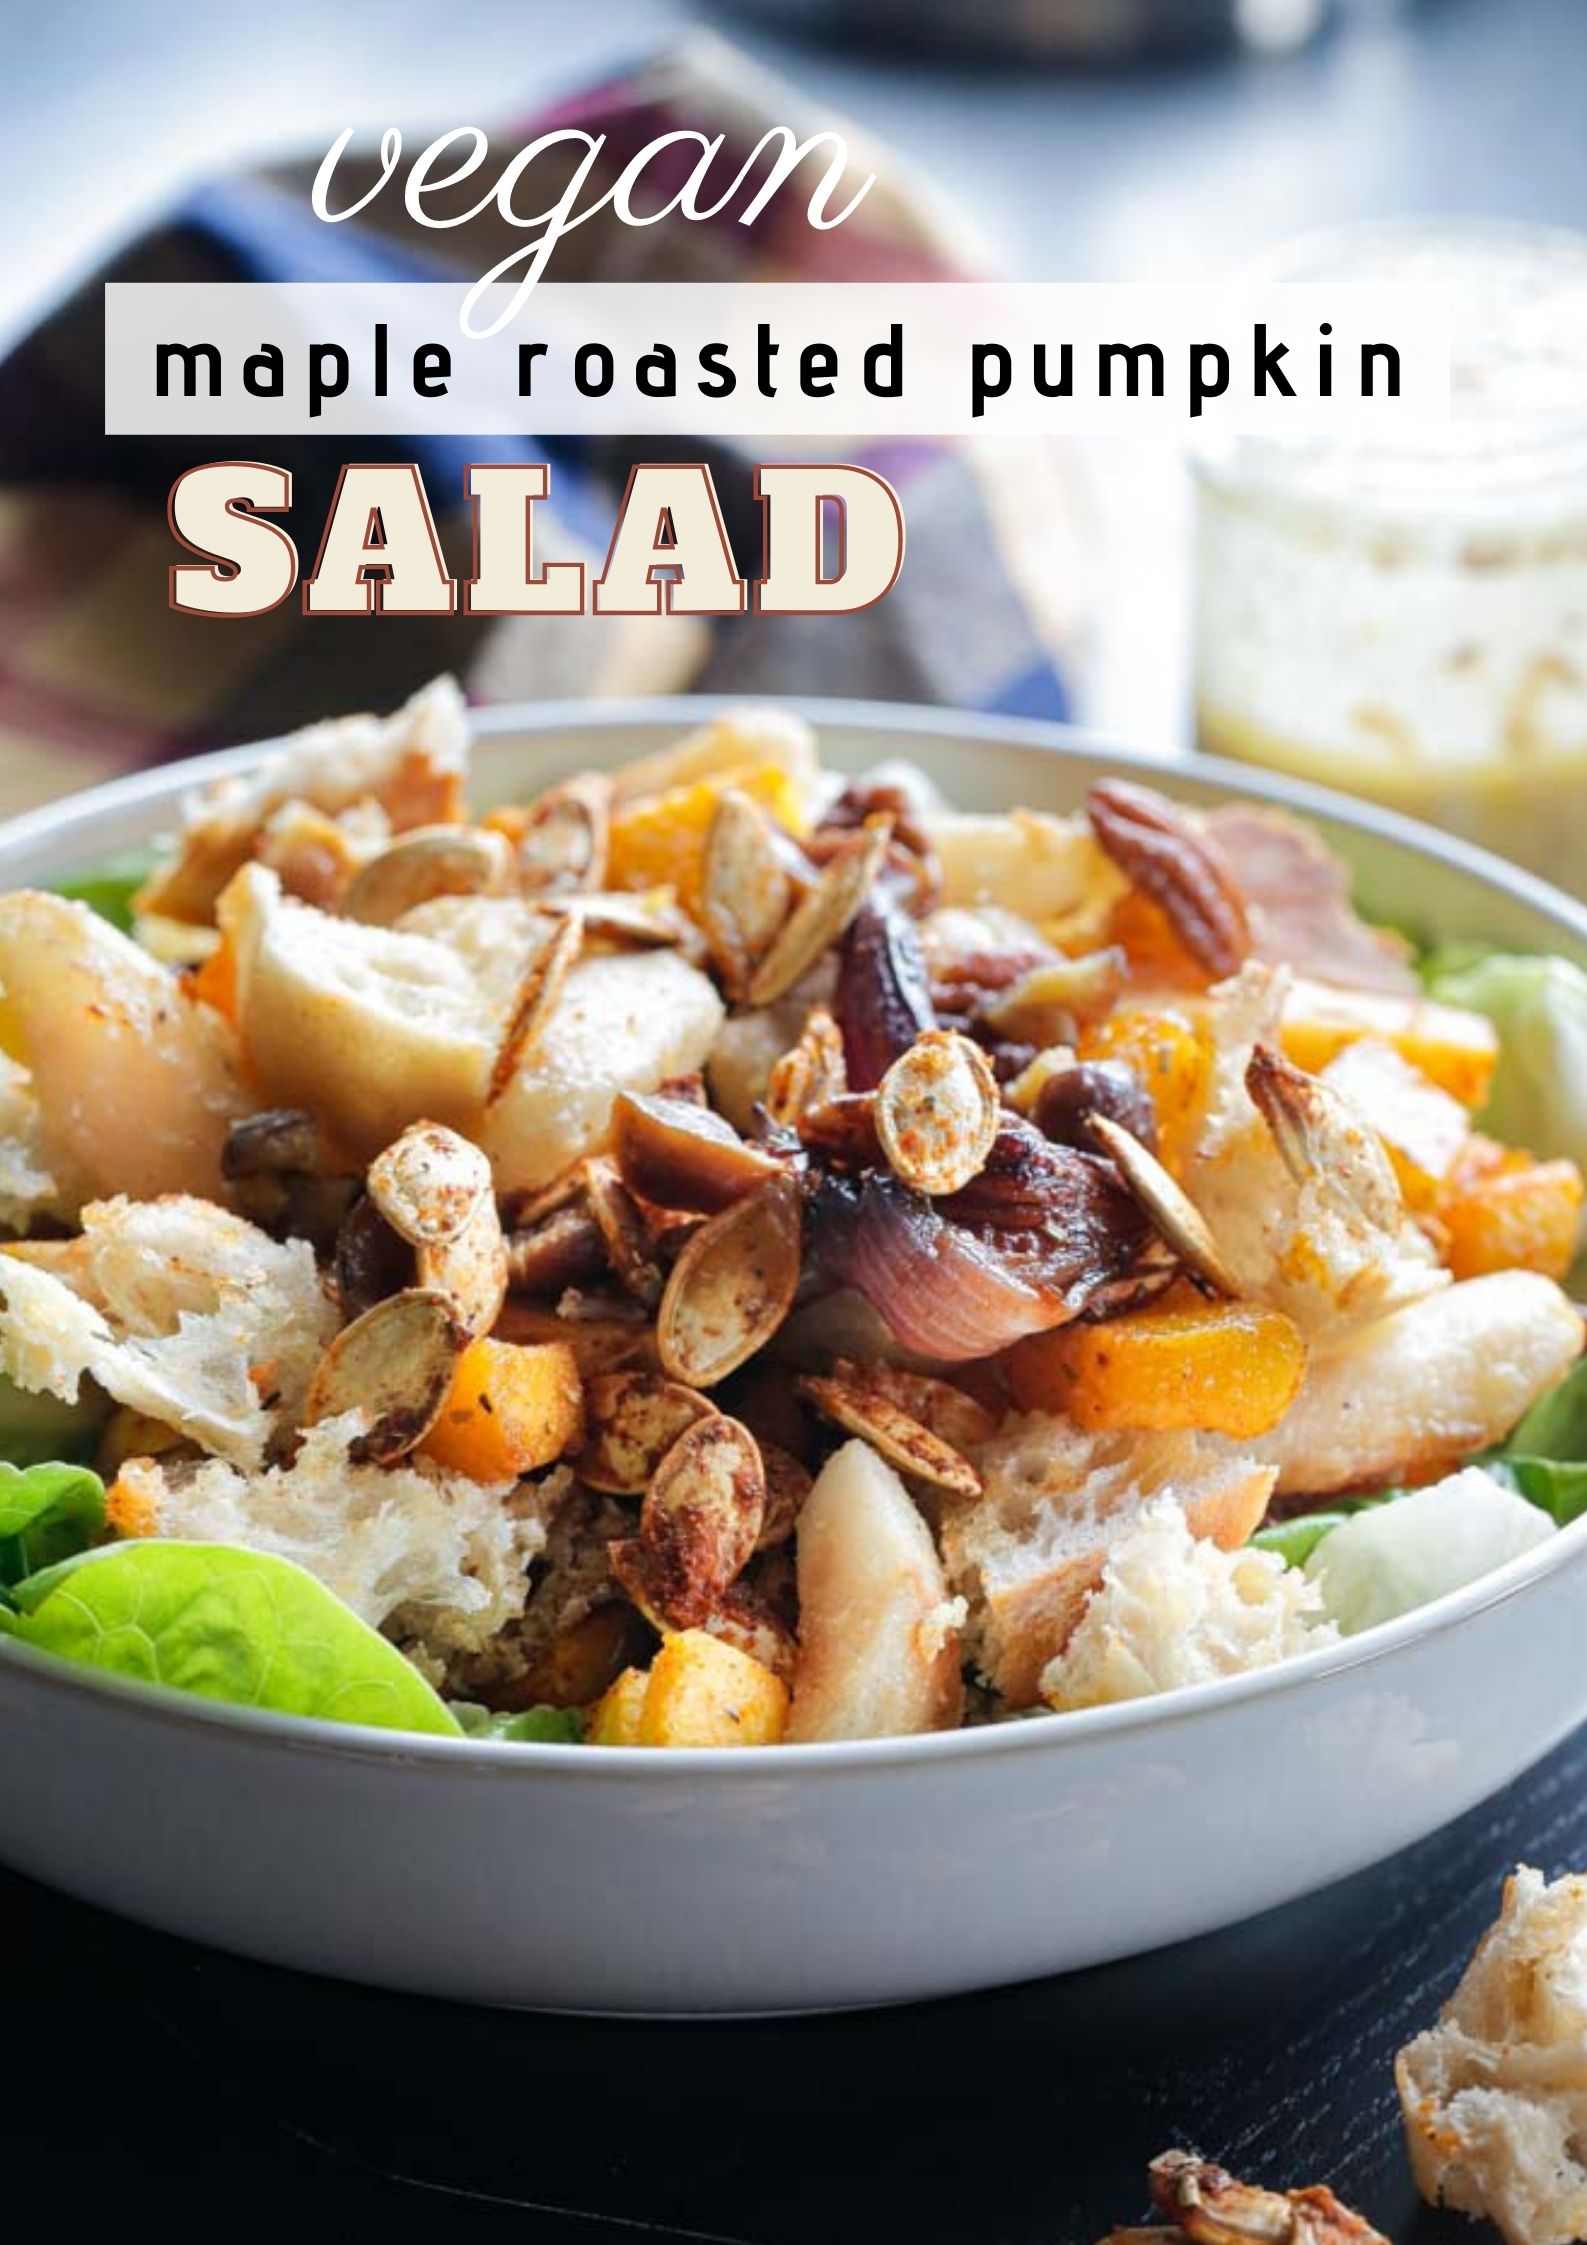 Drizzled with a light tahini dressing this fully loaded pumpkin salad with warm pears, toasted pecans, crisp croutons and spiced pumpkin seeds is everything a salad should be! Recipe on thecookandhim.com #roastedpumpkin #pumpkinrecipes #pumpkinsalad #vegan #tahini #roastedvegsalad #warmsalad